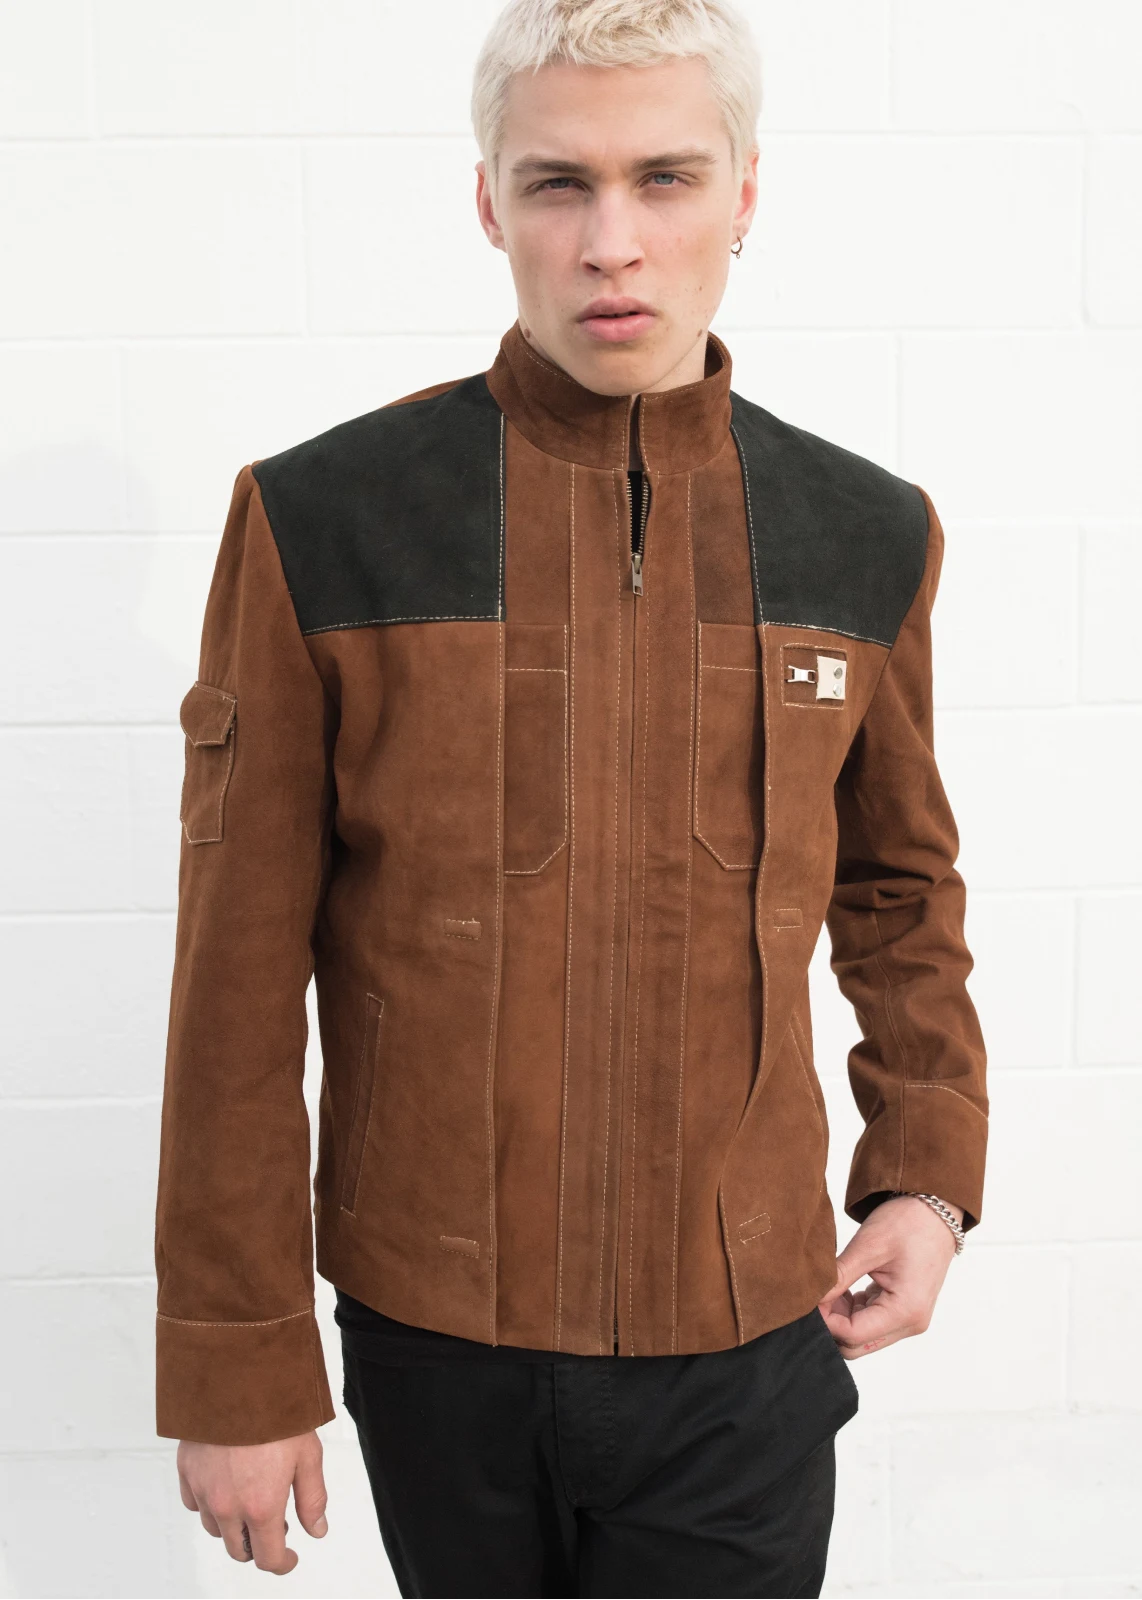 Mens Winter Brown Leather Han Solo Jacket